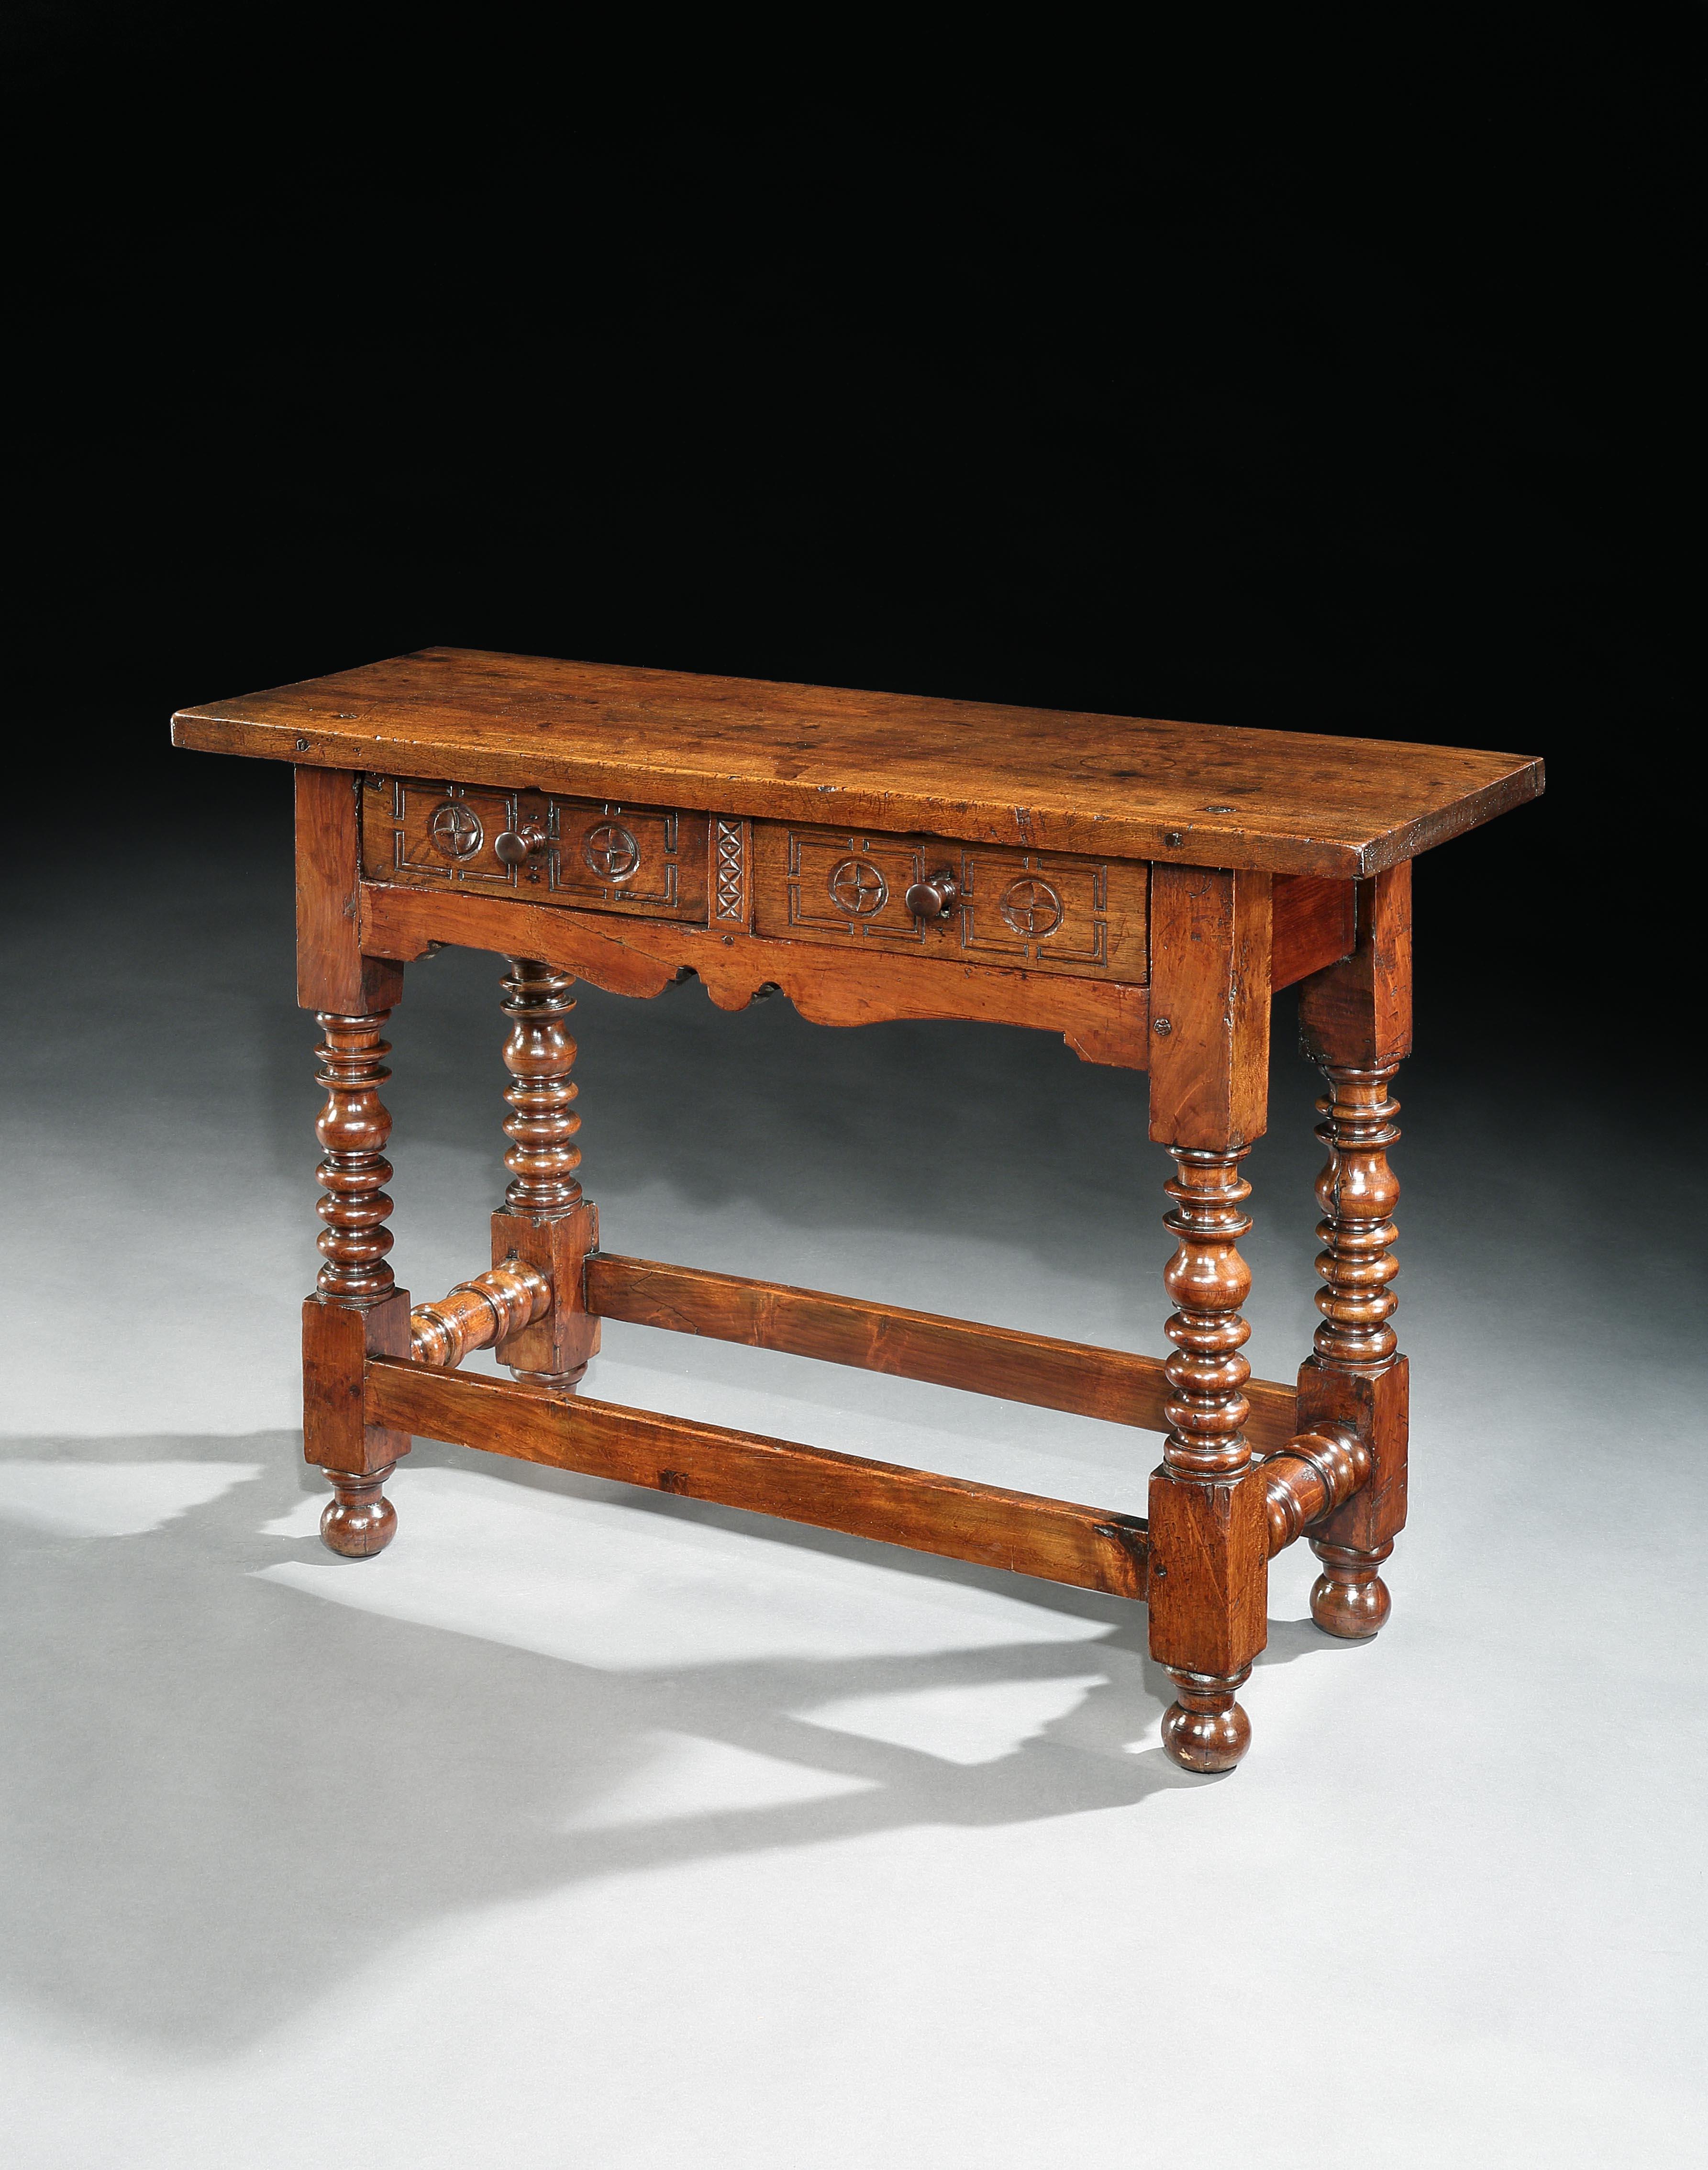 This characterful table is of rare narrow depth of 39cm. It is characteristic of Spanish Baroque furniture with a thick single piece top, simple bold chip carved ornament and bold turnings. It has a rich lustrous patina.
 
 The thick single plank